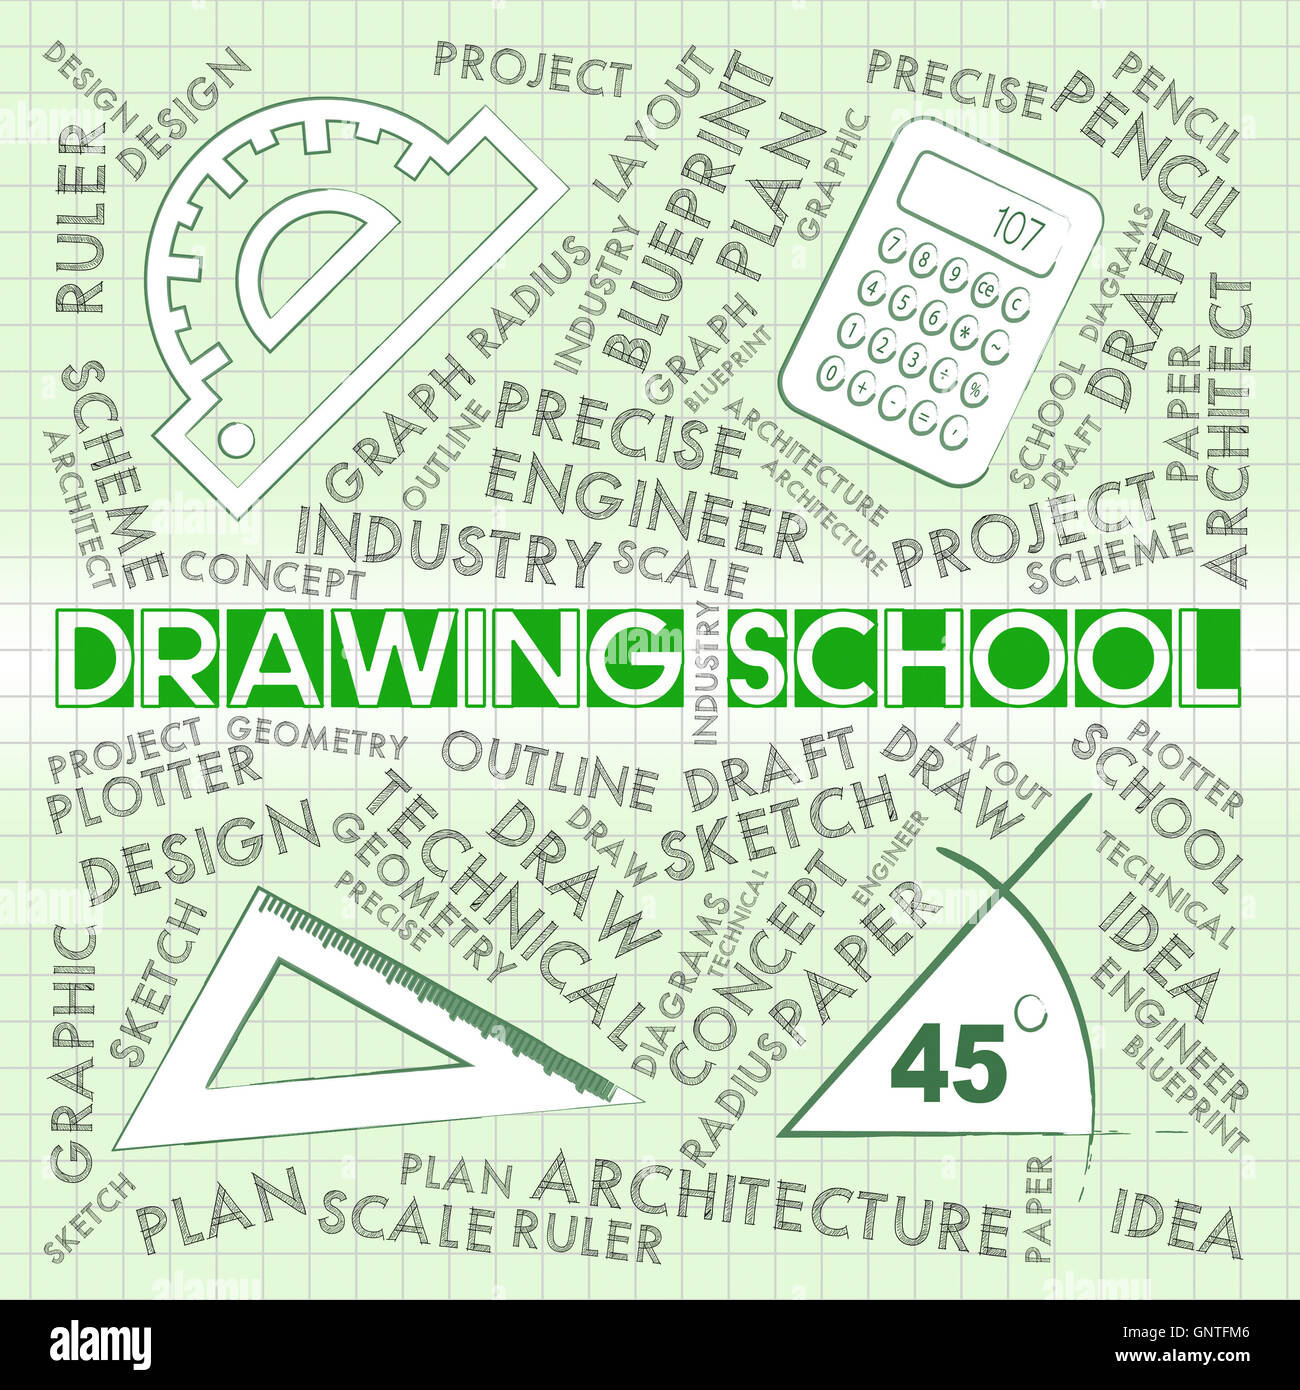 Drawing School Showing Design Education And Learning Stock Photo